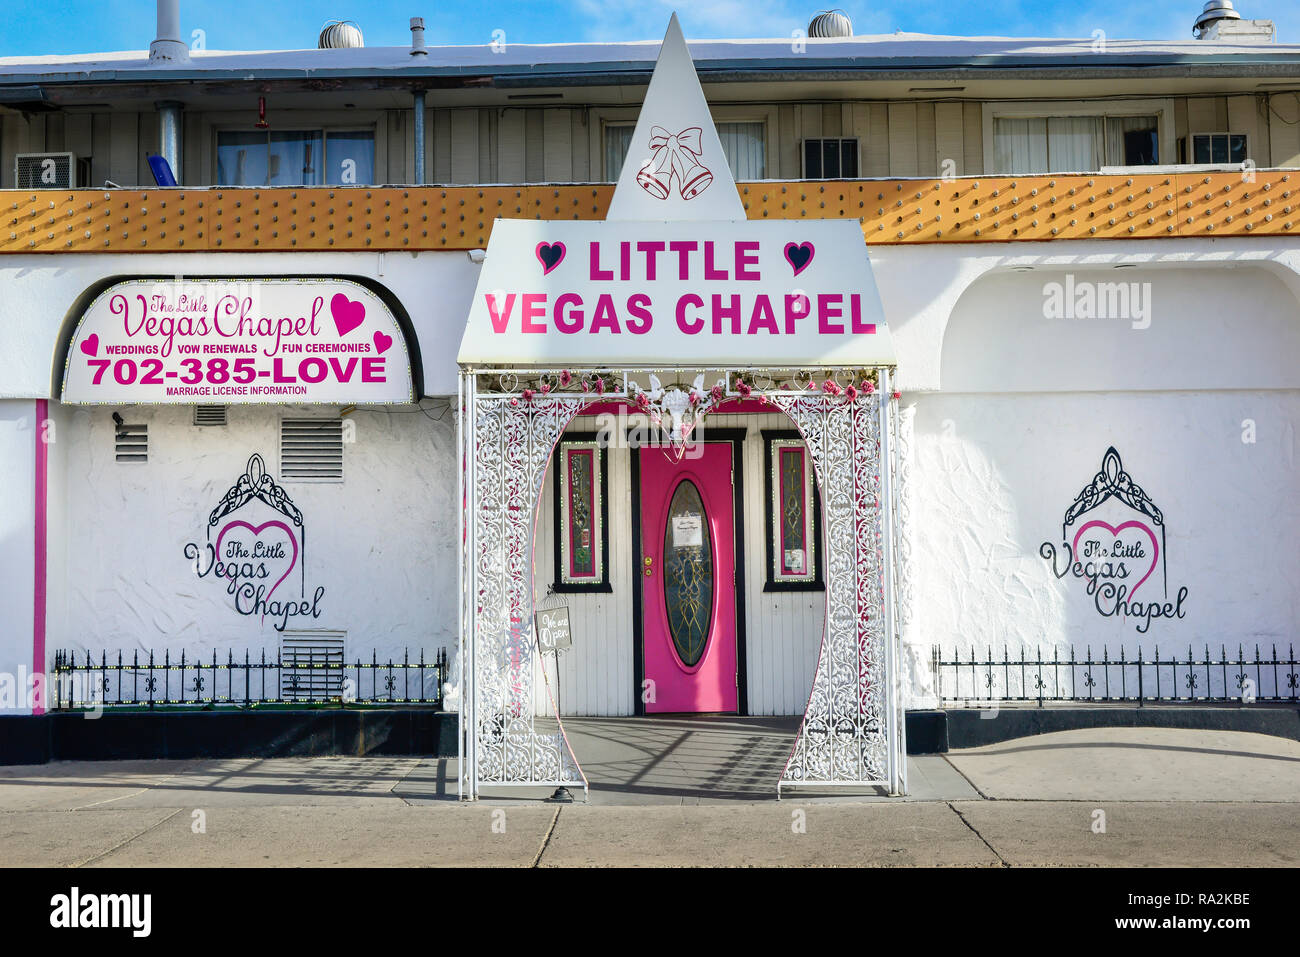 The Little Vegas Chapel offers weddings with an option for Elvis ceremonies, it's popular for a quickie wedding, on the Las Vegas Strip, Las Vegas, NV Stock Photo